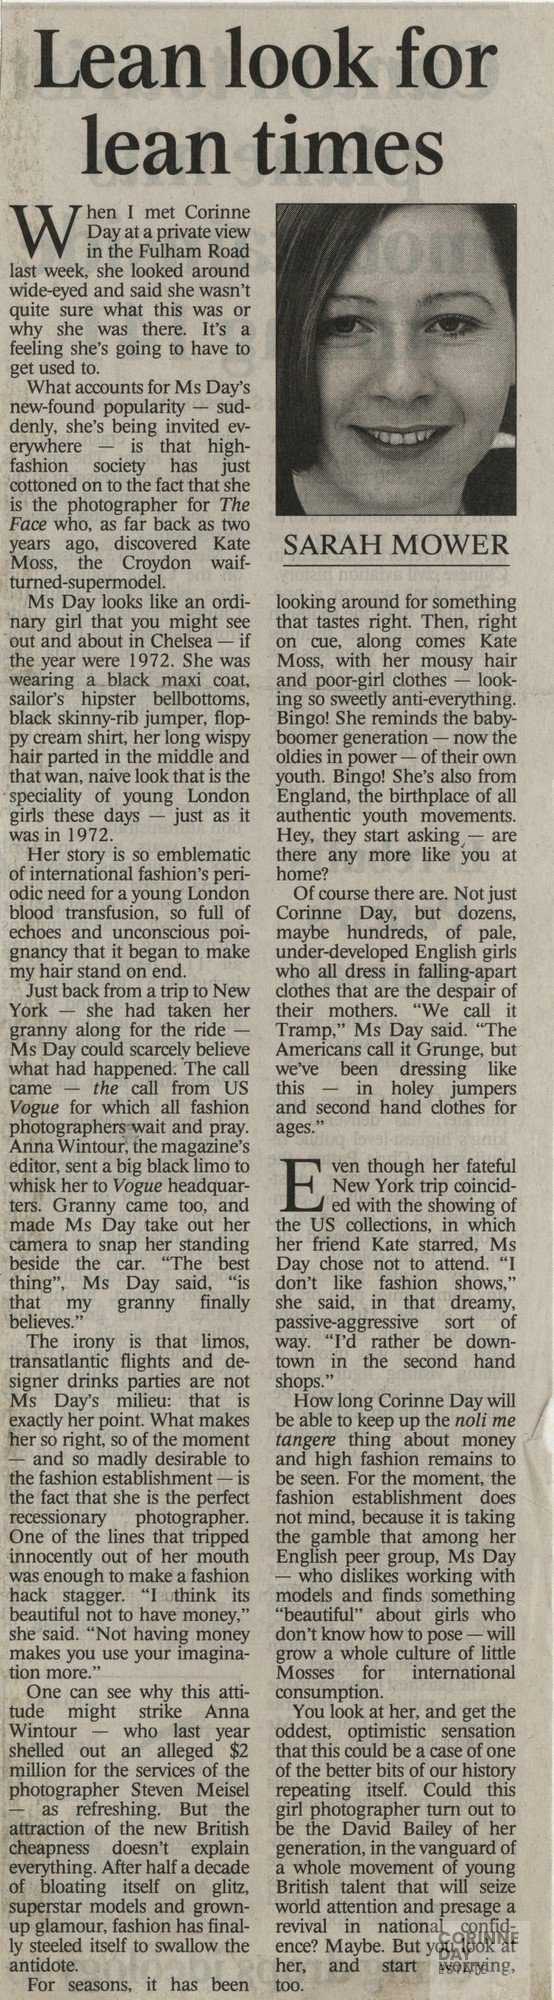 Lean look for lean times, The Times, 25 Nov 1992 — Image 1 of 1